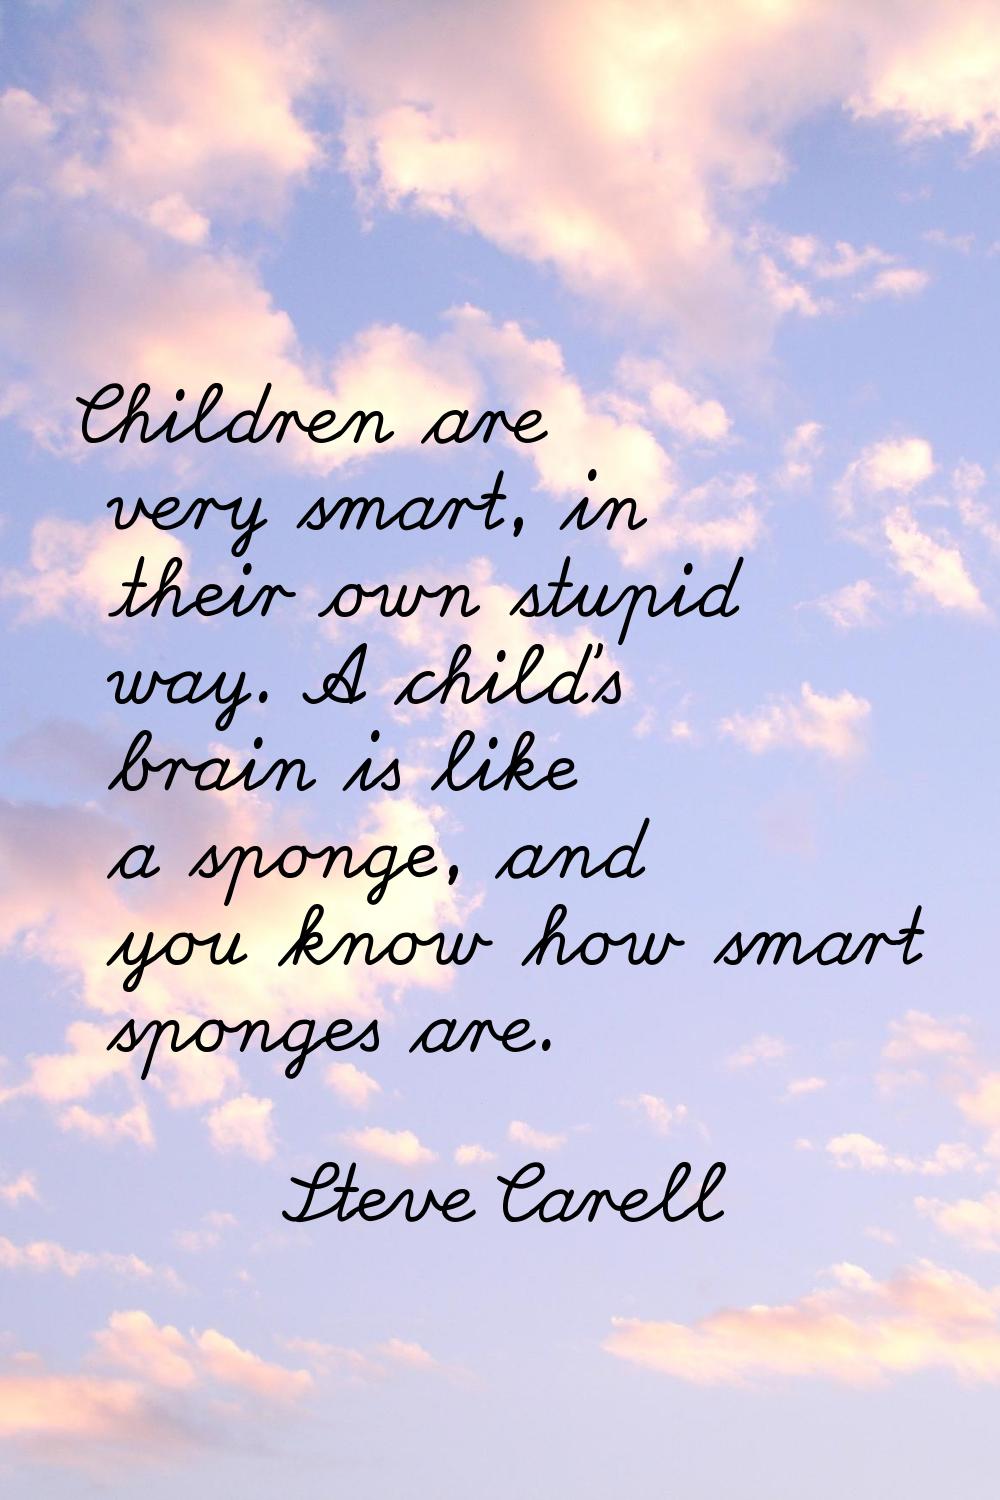 Children are very smart, in their own stupid way. A child's brain is like a sponge, and you know ho